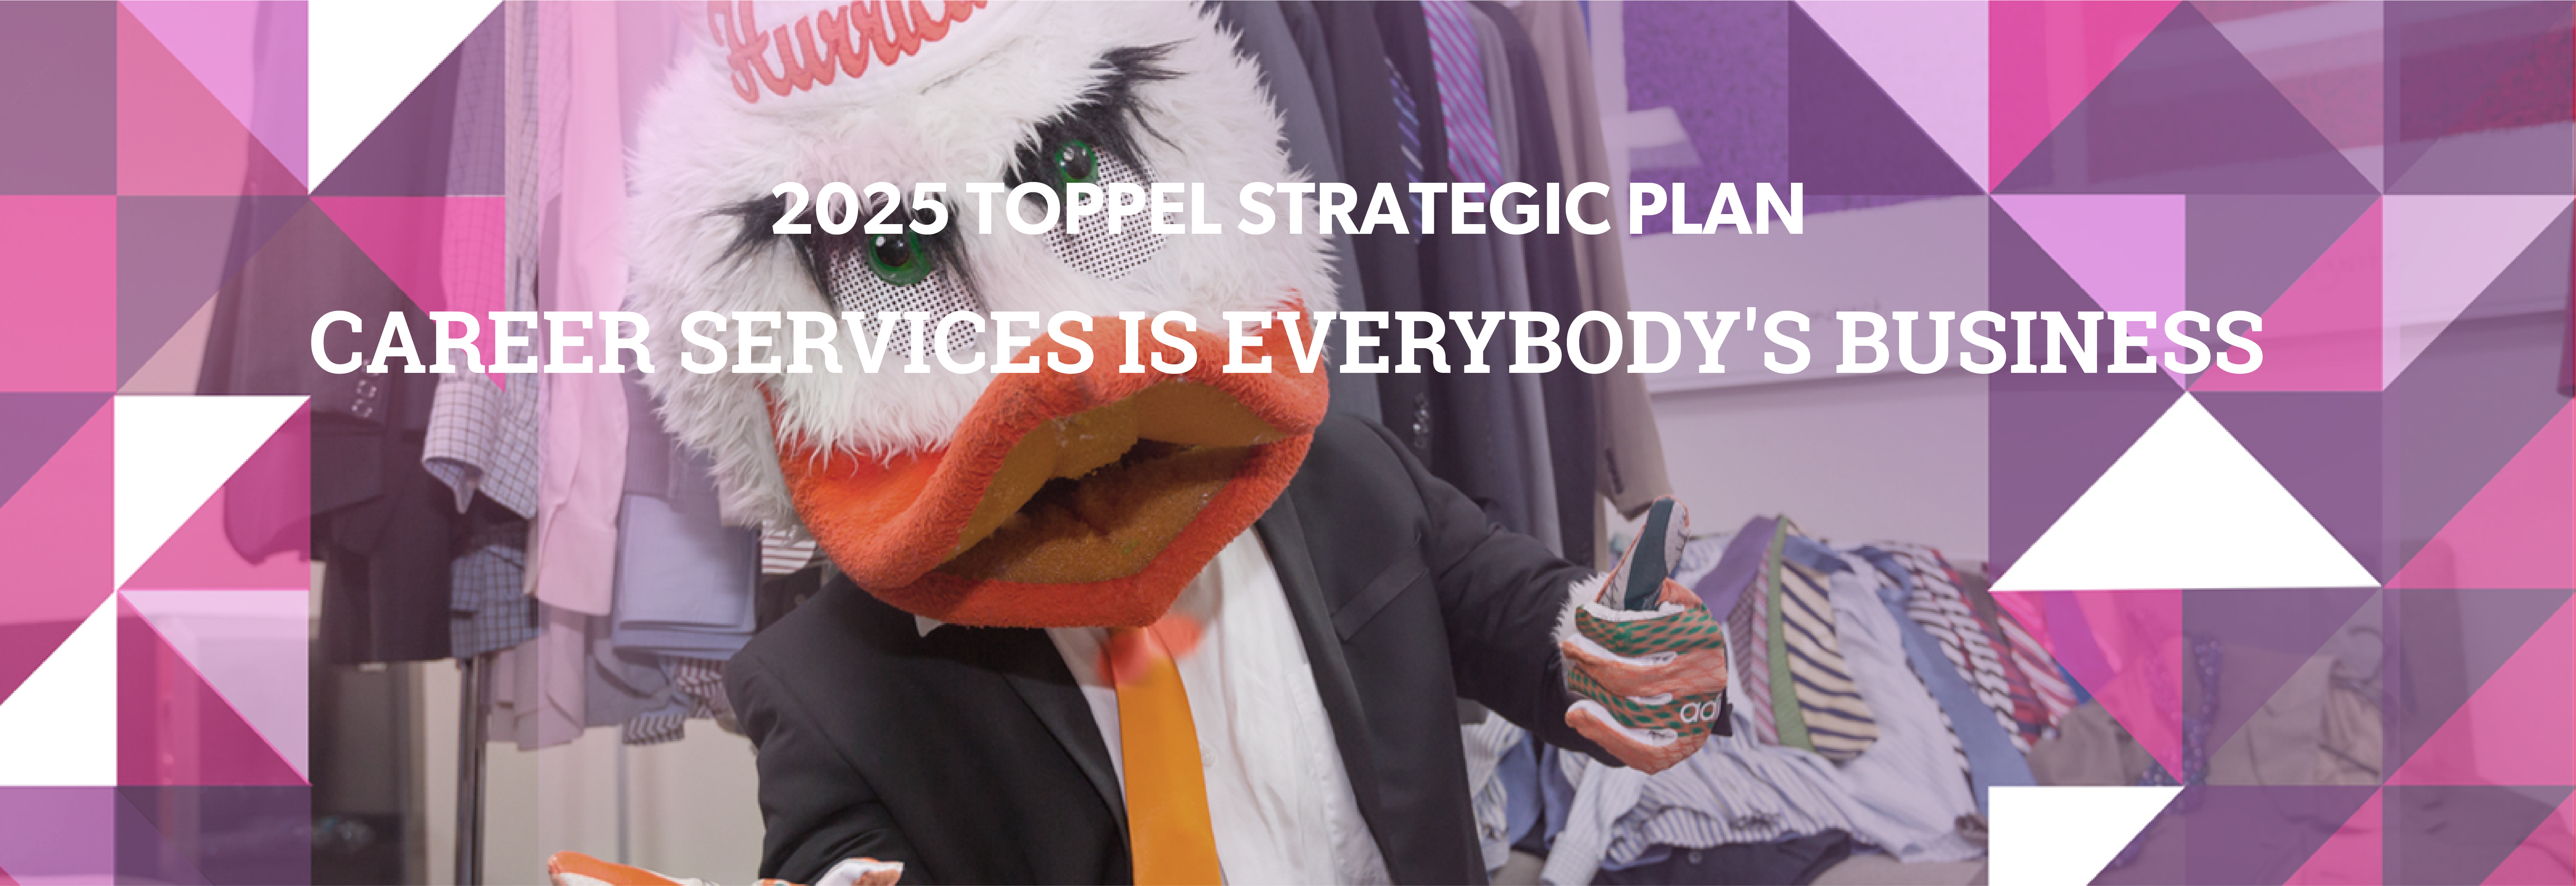 Toppel 2025 Career Services is Everybody's Business